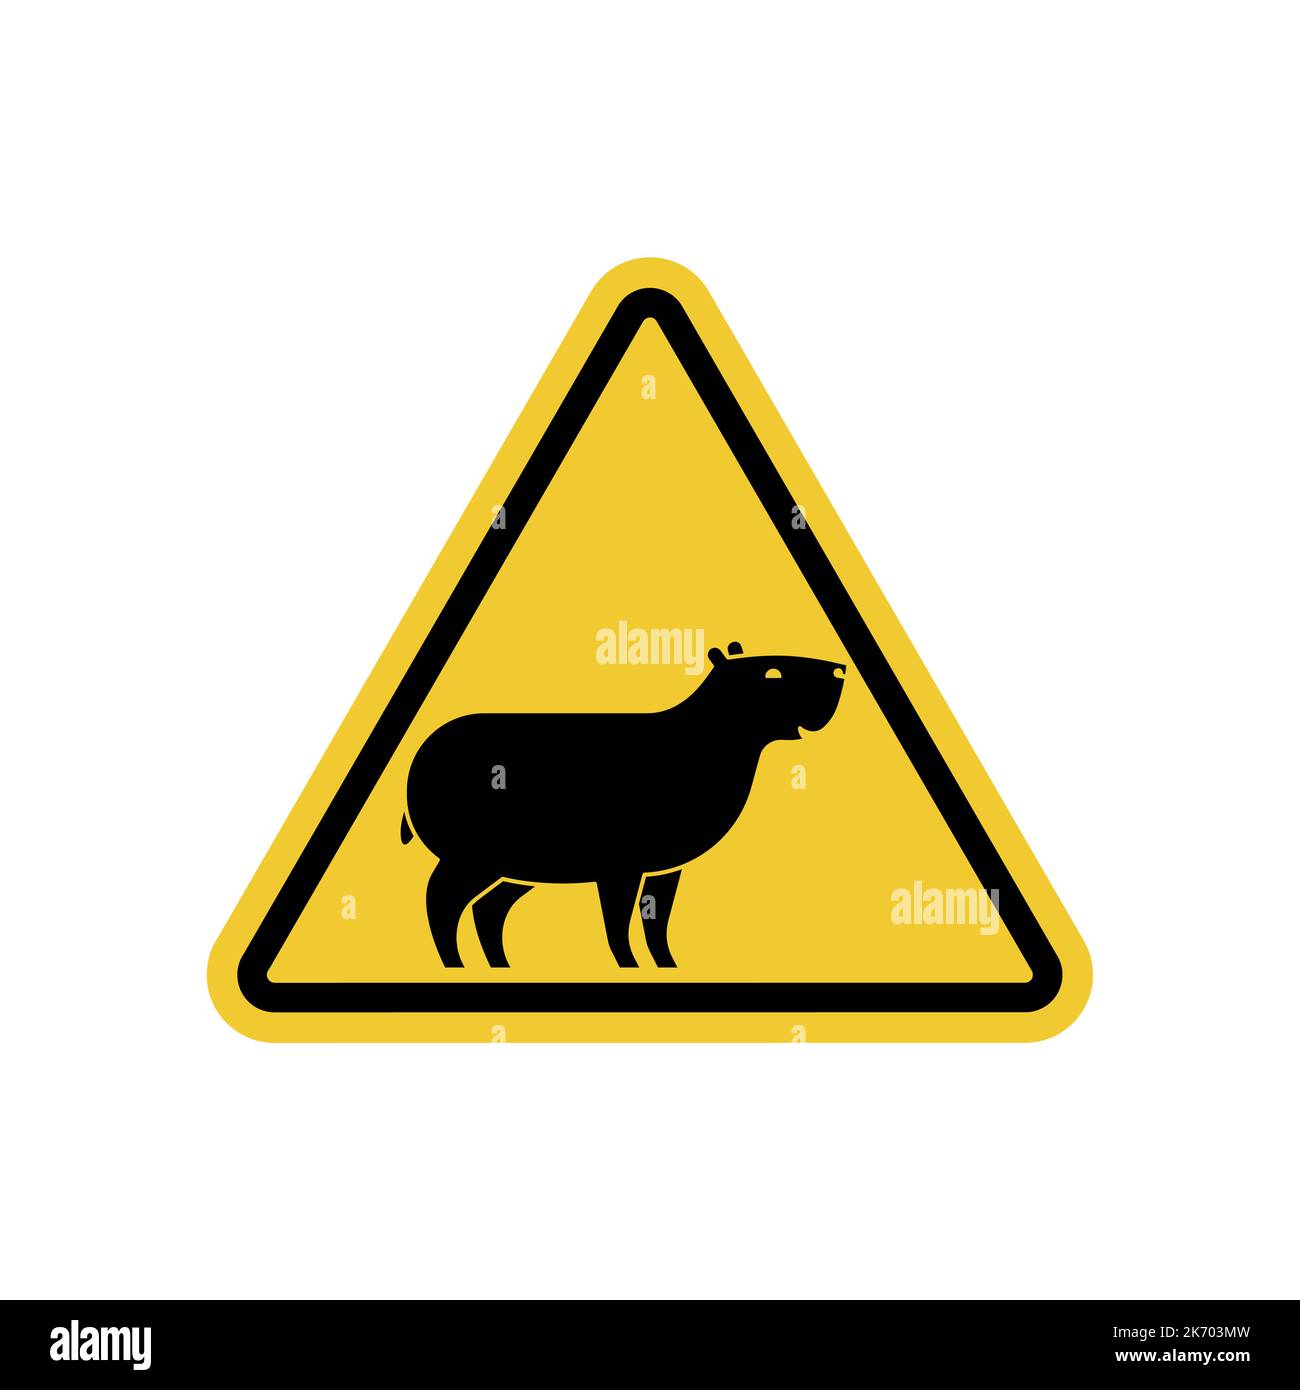 Attention Capybara. Caution guinea pig. Yellow Danger road sign. Stock Vector